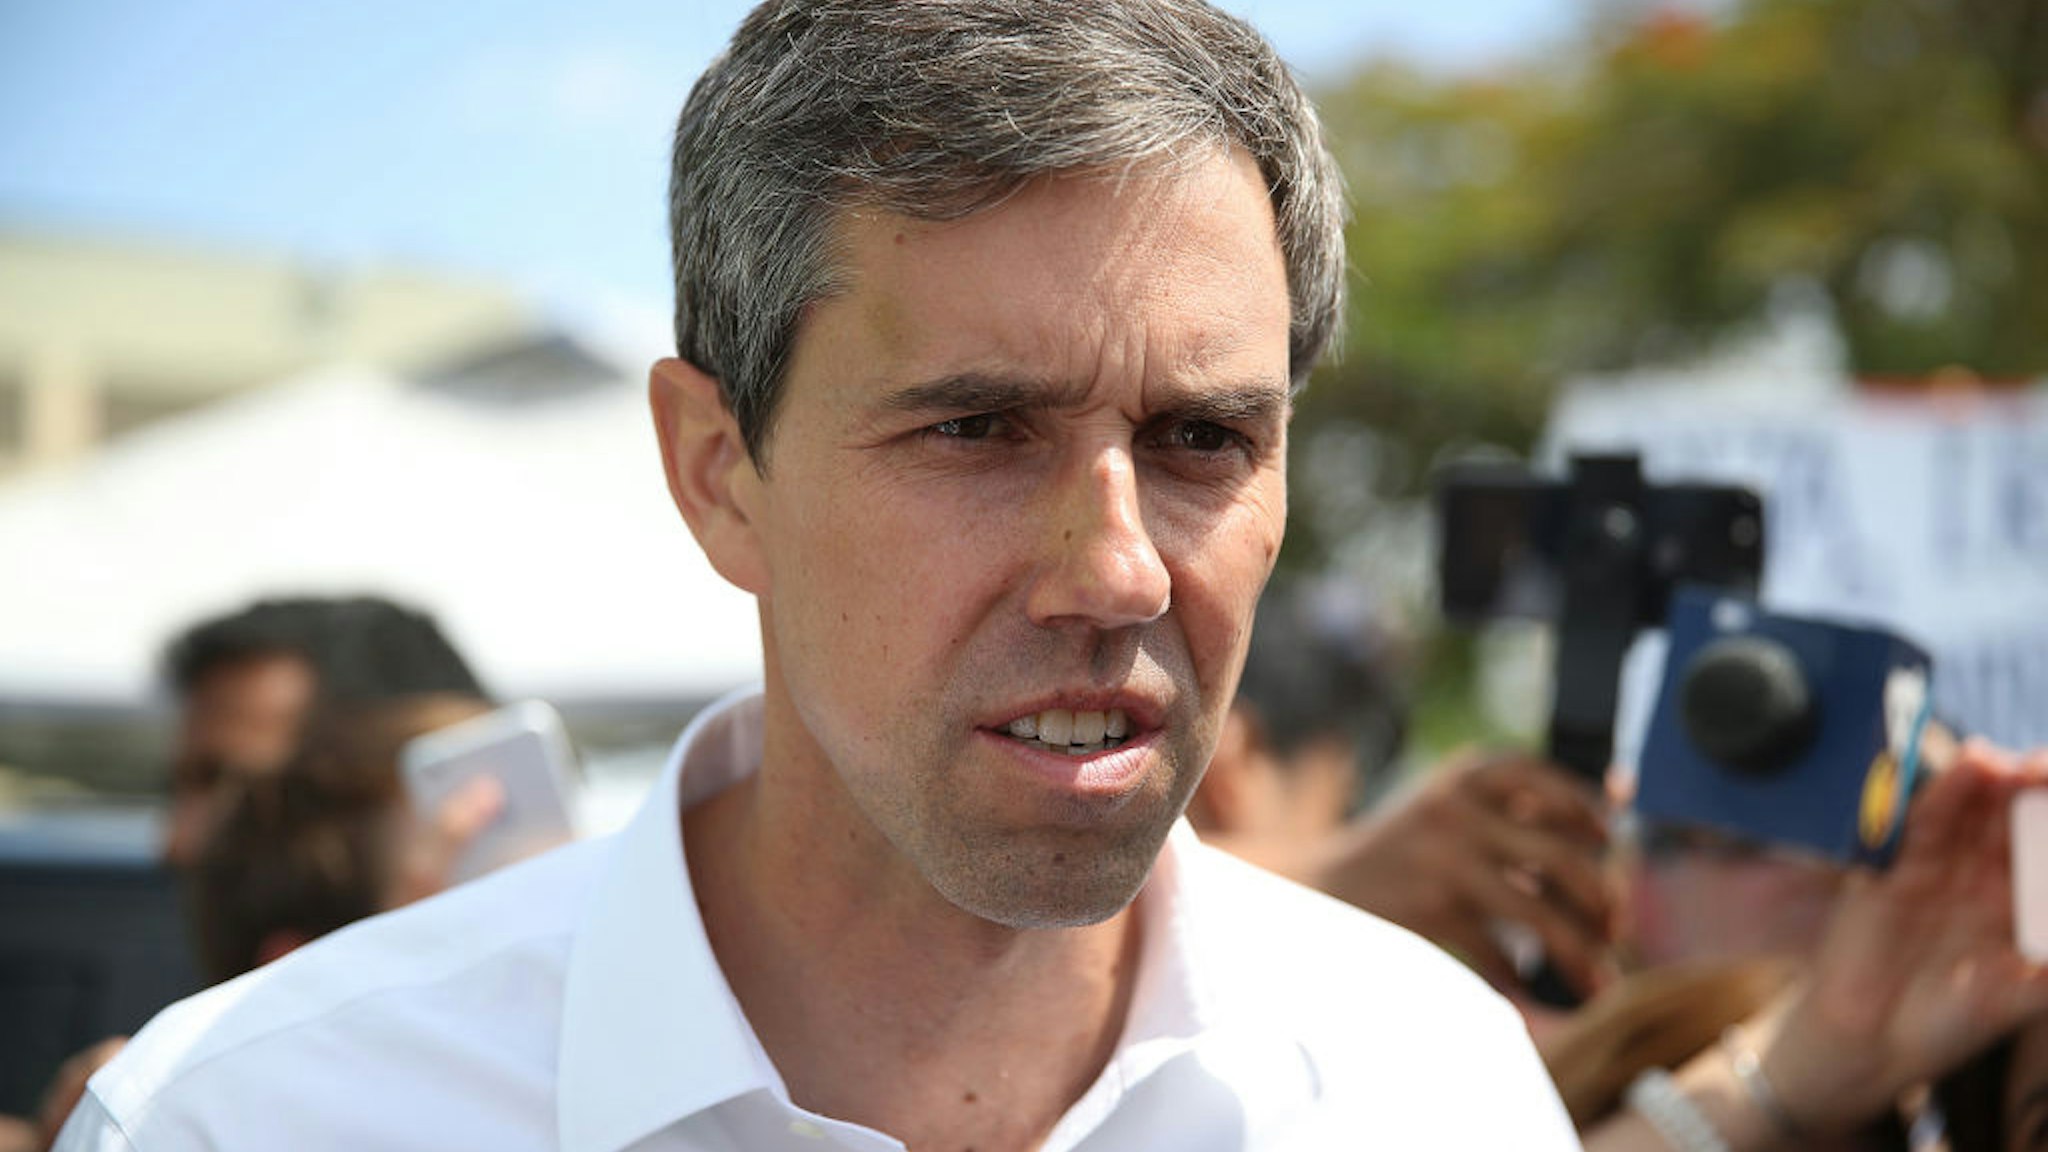 Beto O'Rourke speaks to the media as he visits the outside of a detention center for migrant children